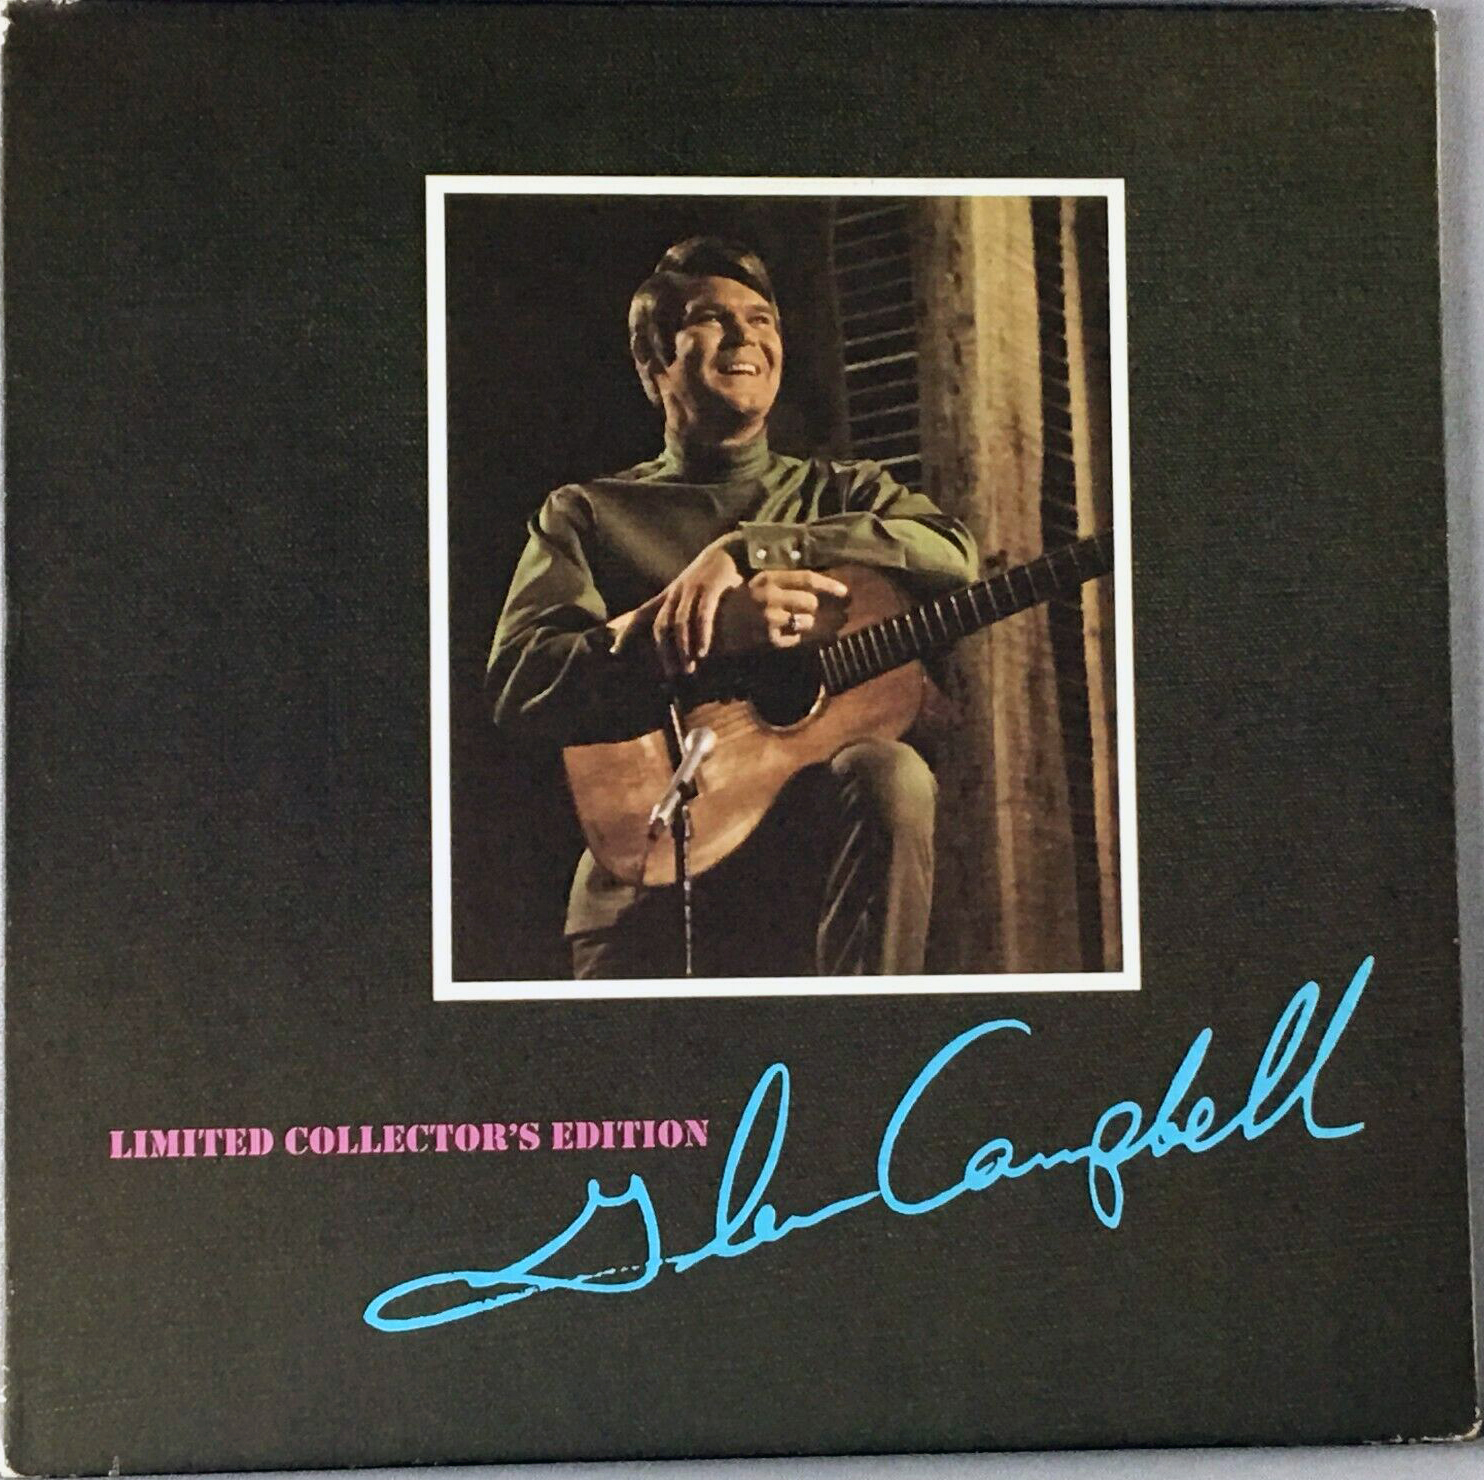 Limited Collectors Edition Glen Campbell.jpg